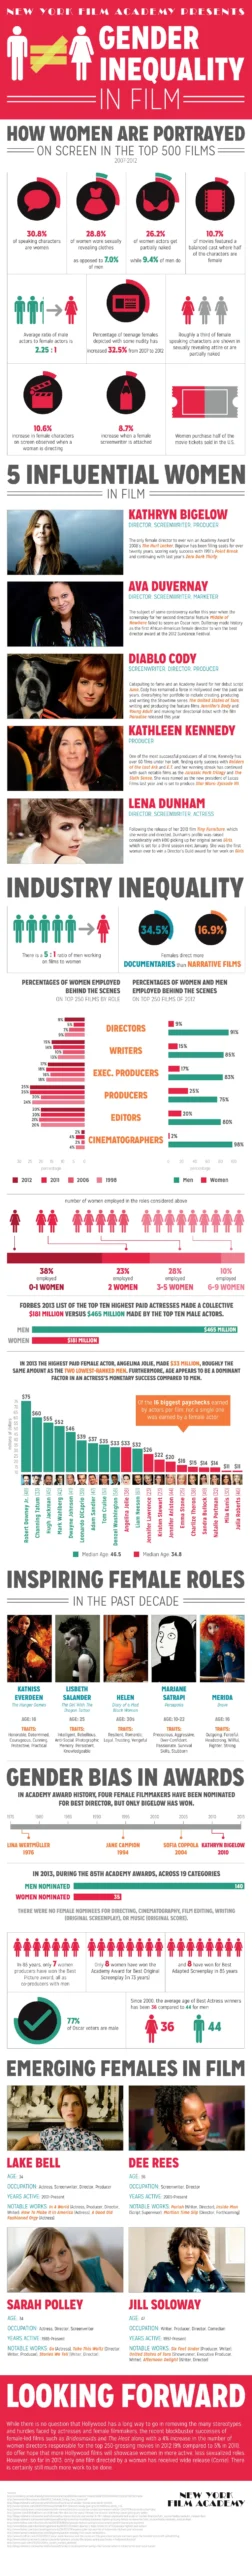 Gender Inequality In The Film Industry New York Film Academy
